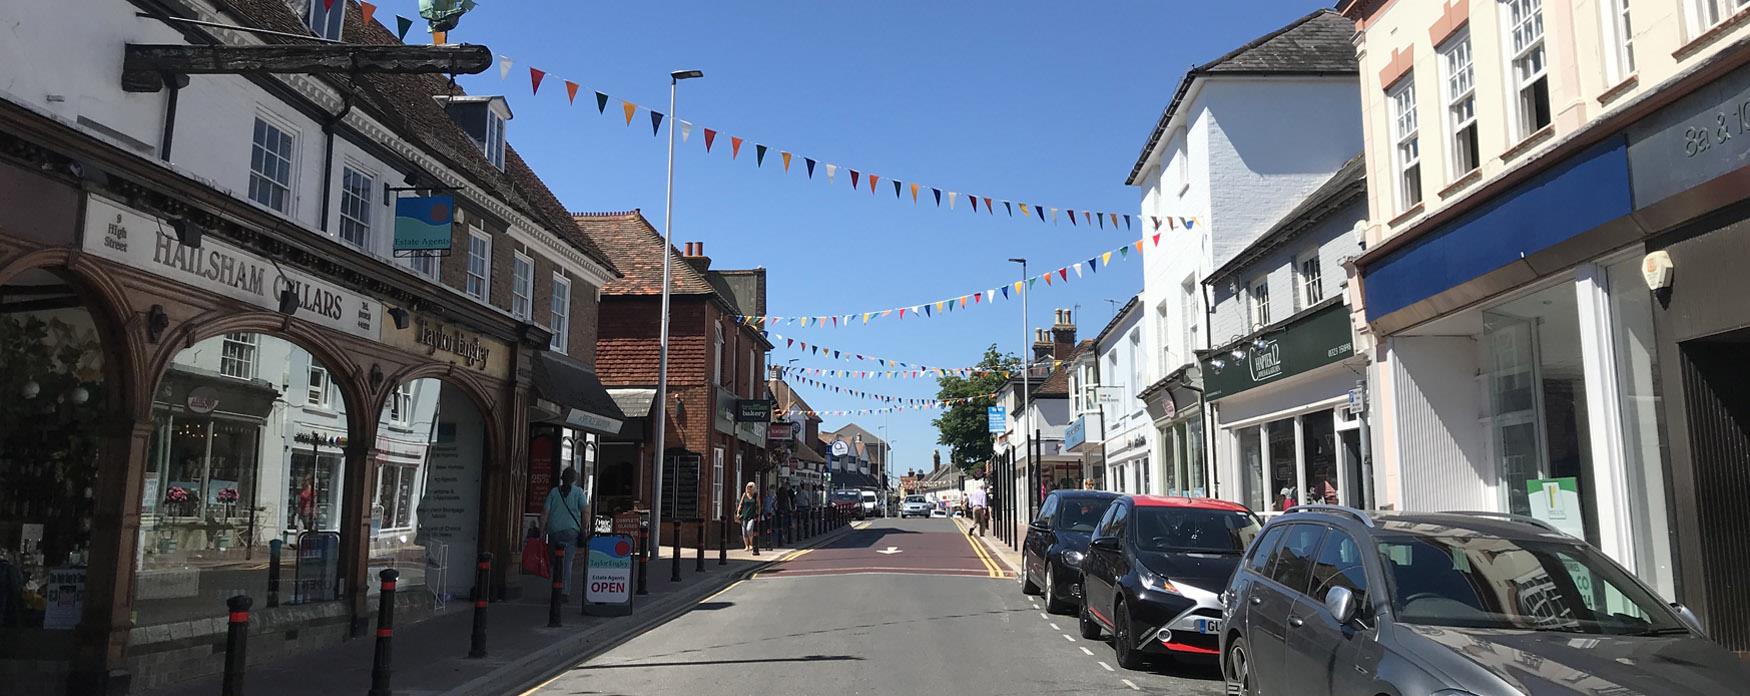 road through hailsham with shops each side and carnival flags overhead